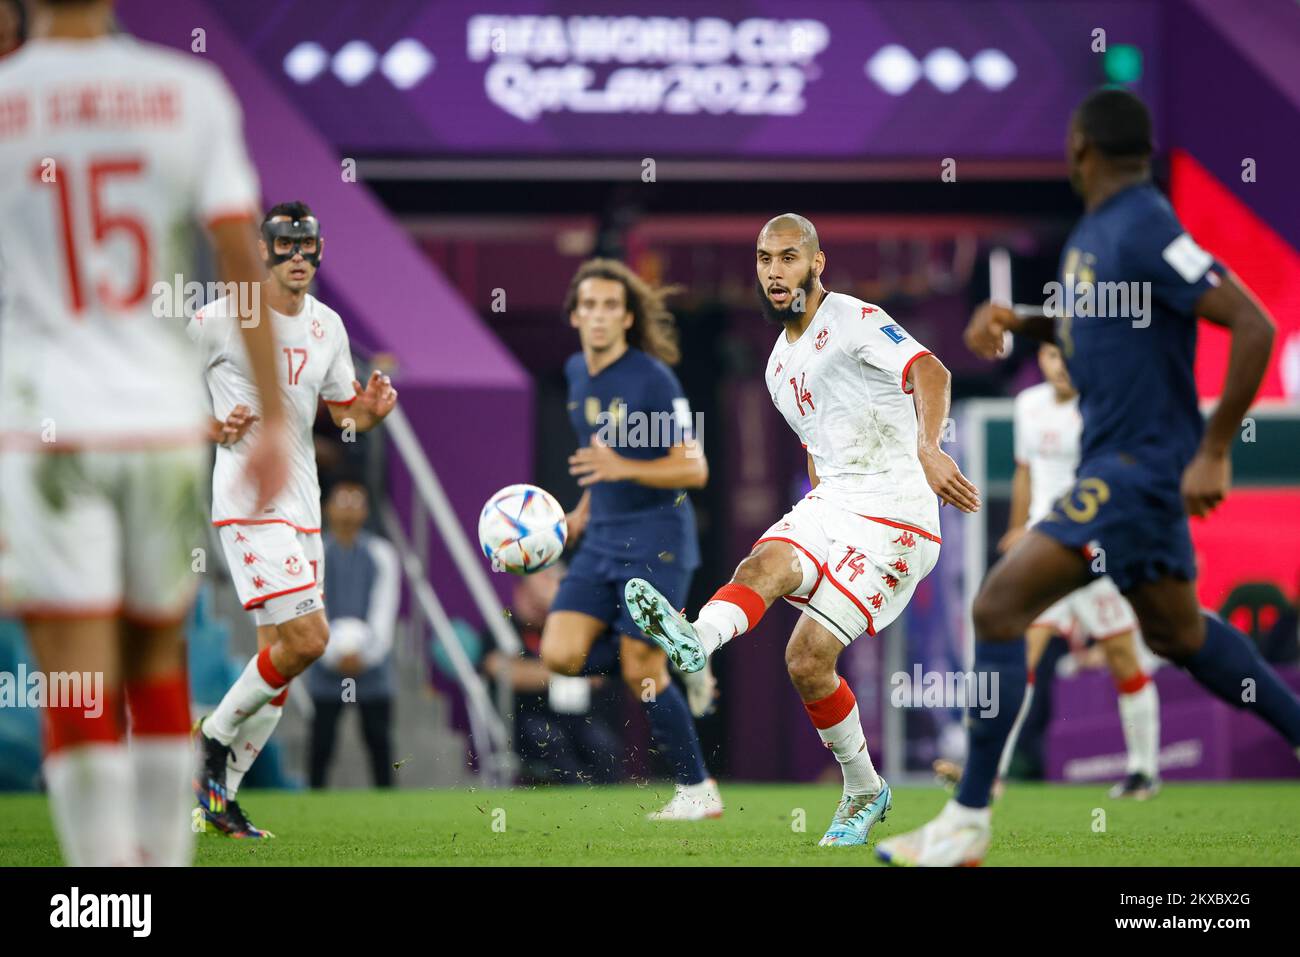 Doha, Qatar. 30th Nov, 2022. LAIDOUNI Aissa of Tunisia during the match between Tunisia and France, valid for the group stage of the World Cup, held at the Education City Stadium in Doha, Qatar. Credit: Rodolfo Buhrer/La Imagem/FotoArena/Alamy Live News Credit: Foto Arena LTDA/Alamy Live News Stock Photo